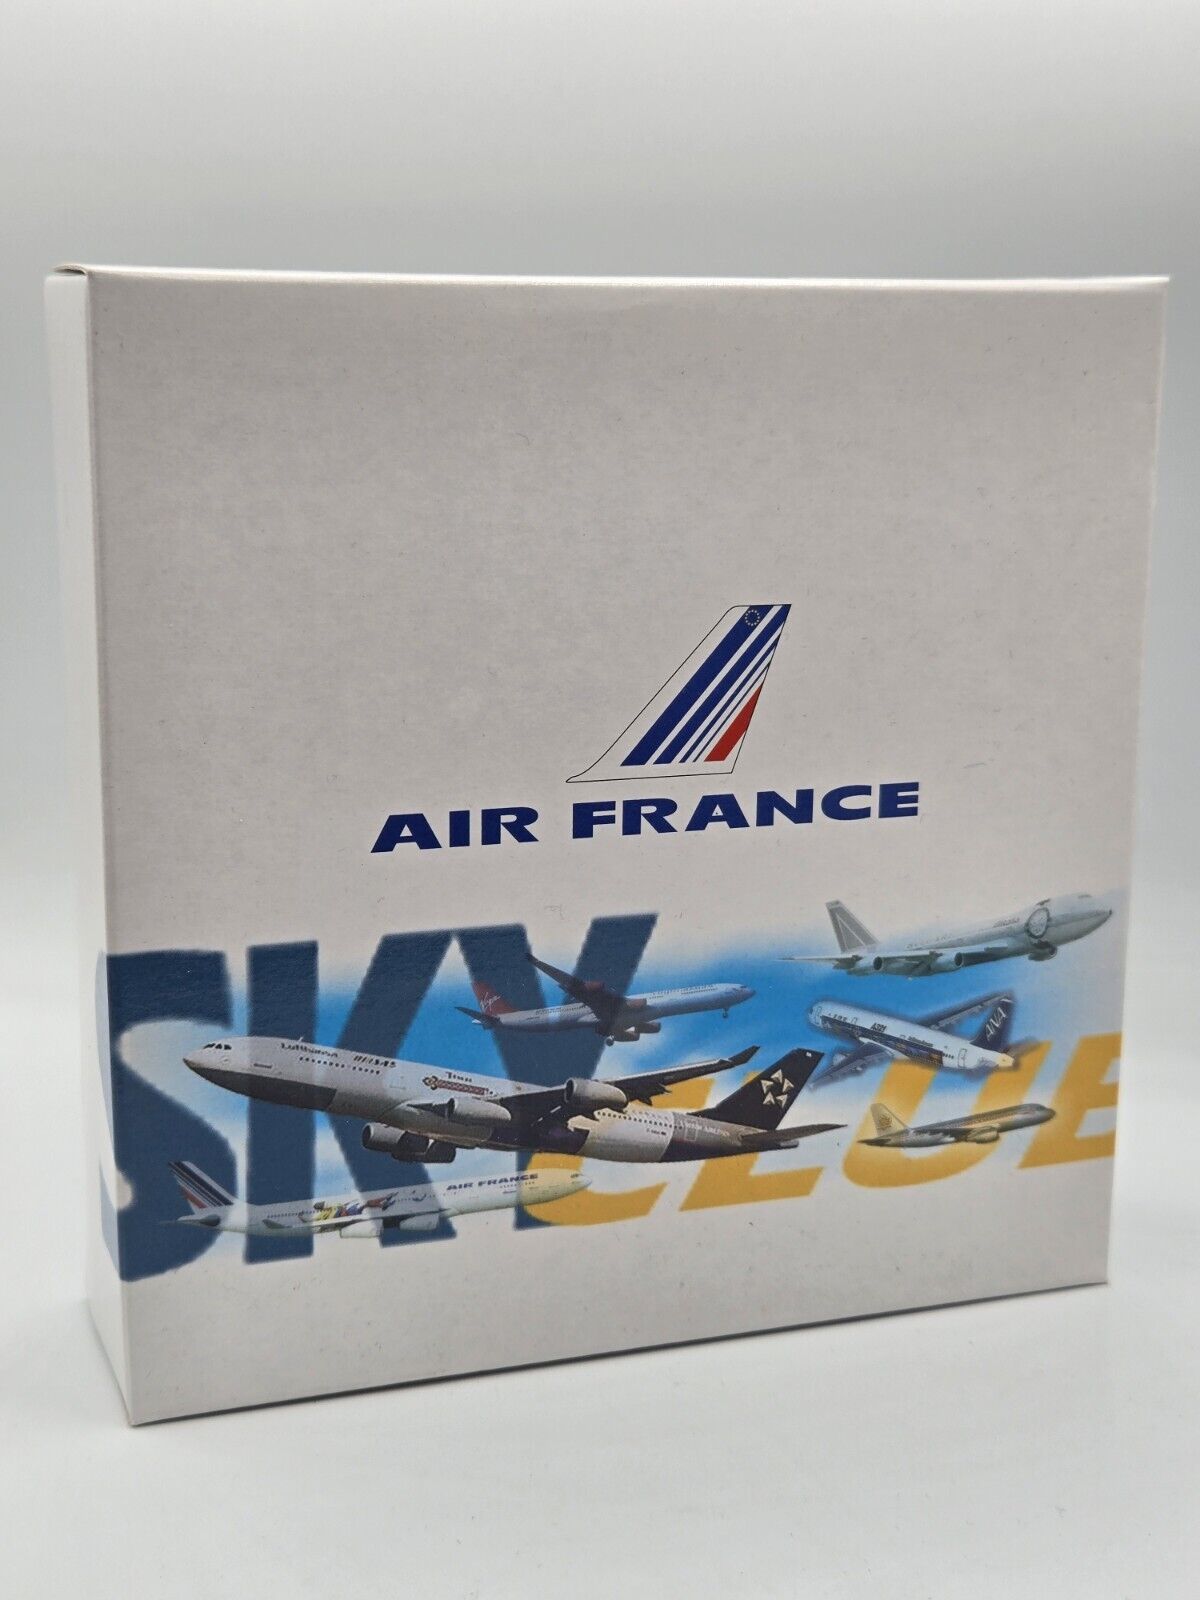 SkyClub Air France A340-311 World Cup 98  1:400 Scale Diecast Airline Model New